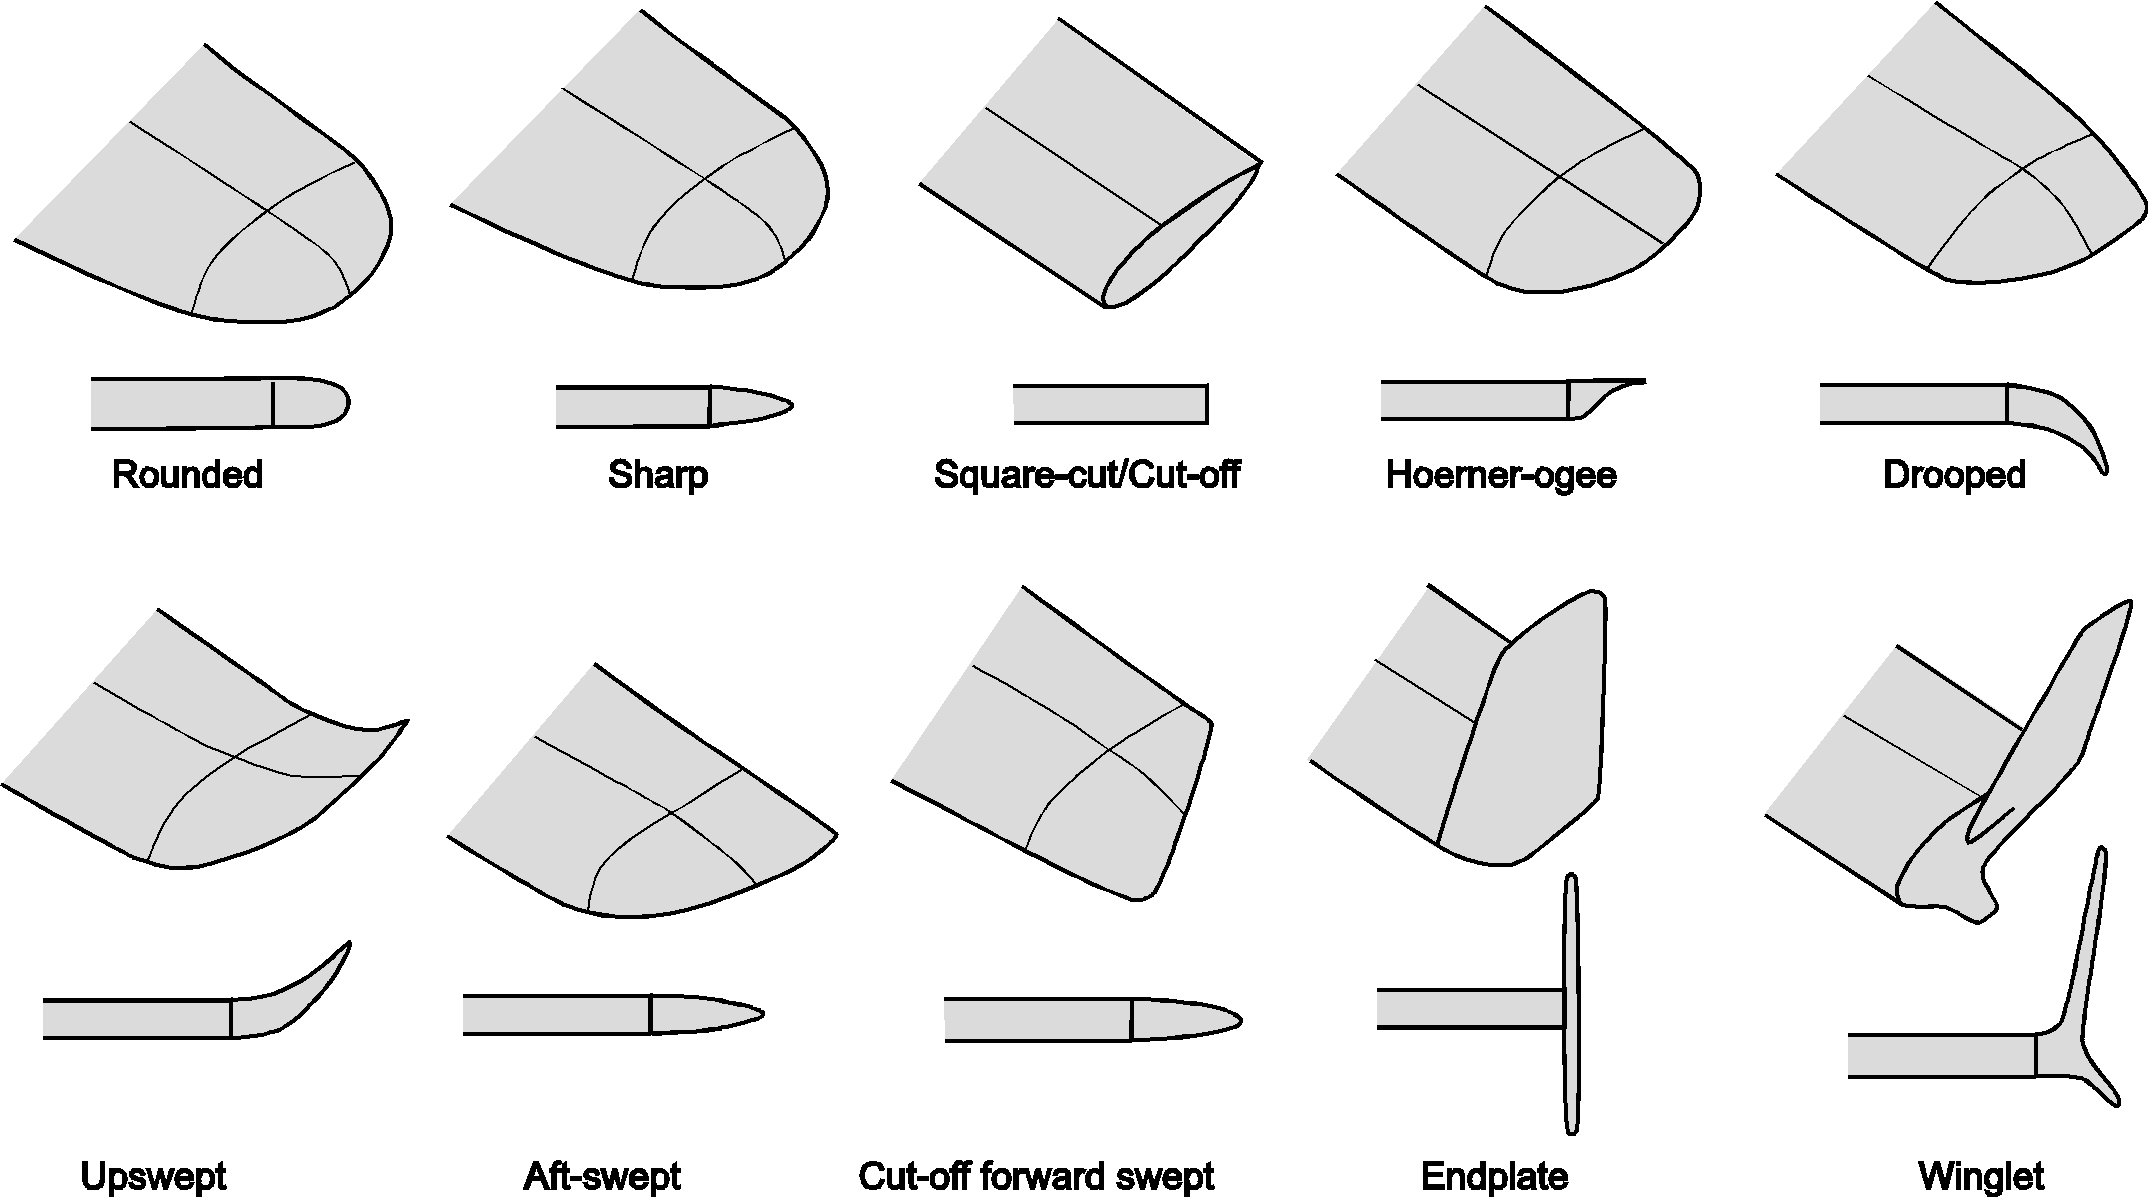 Simple black and grey diagrams of different wing tip shapes, showing the overhead view and end view.